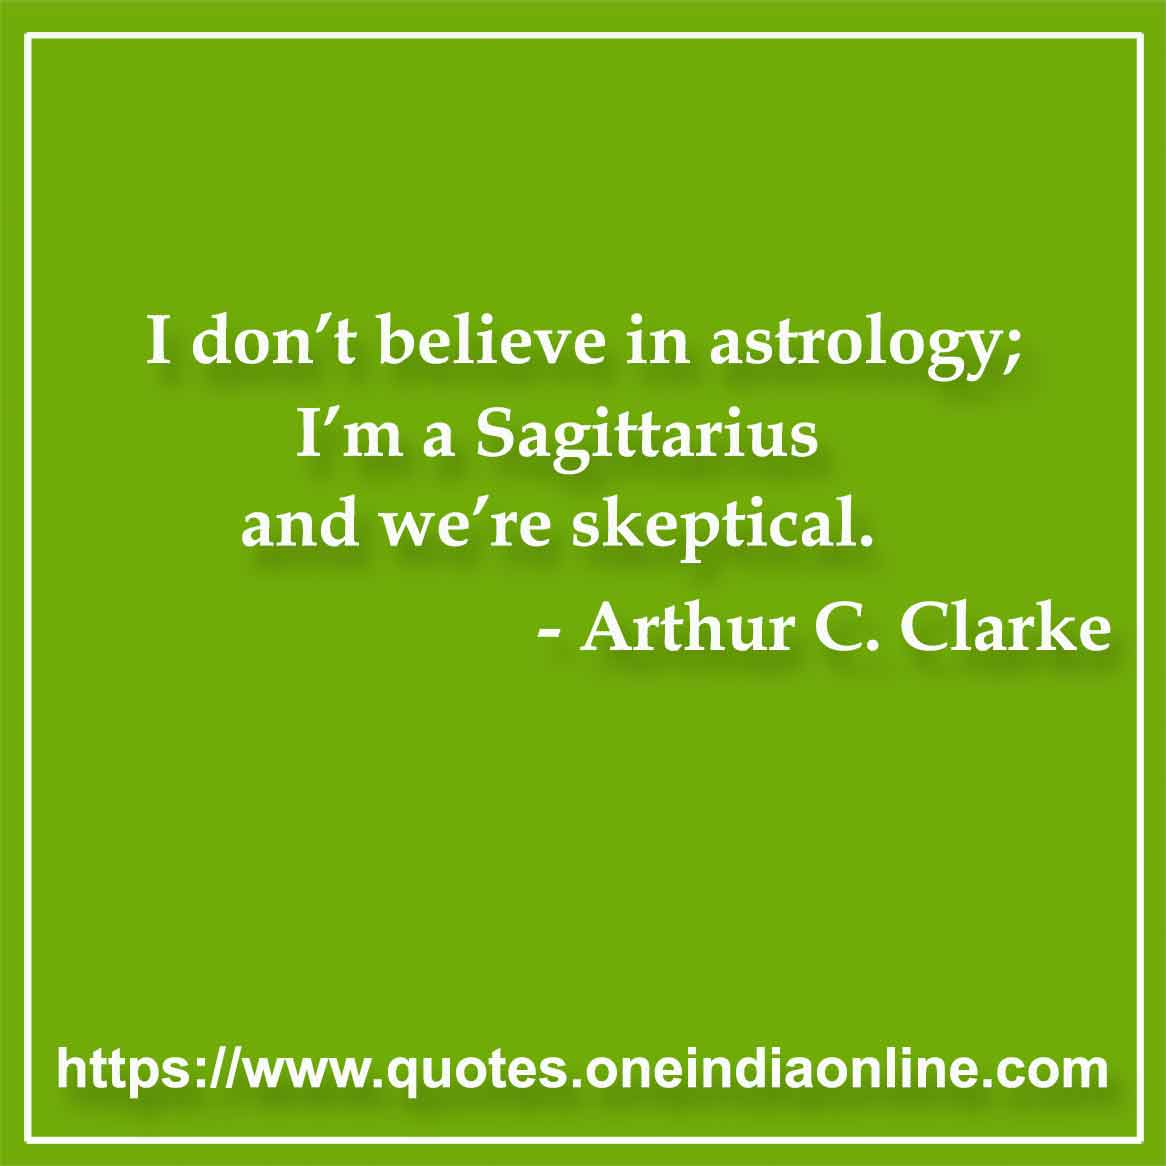 I don’t believe in astrology; I’m a Sagittarius and we’re skeptical.

-  by Arthur C. Clarke